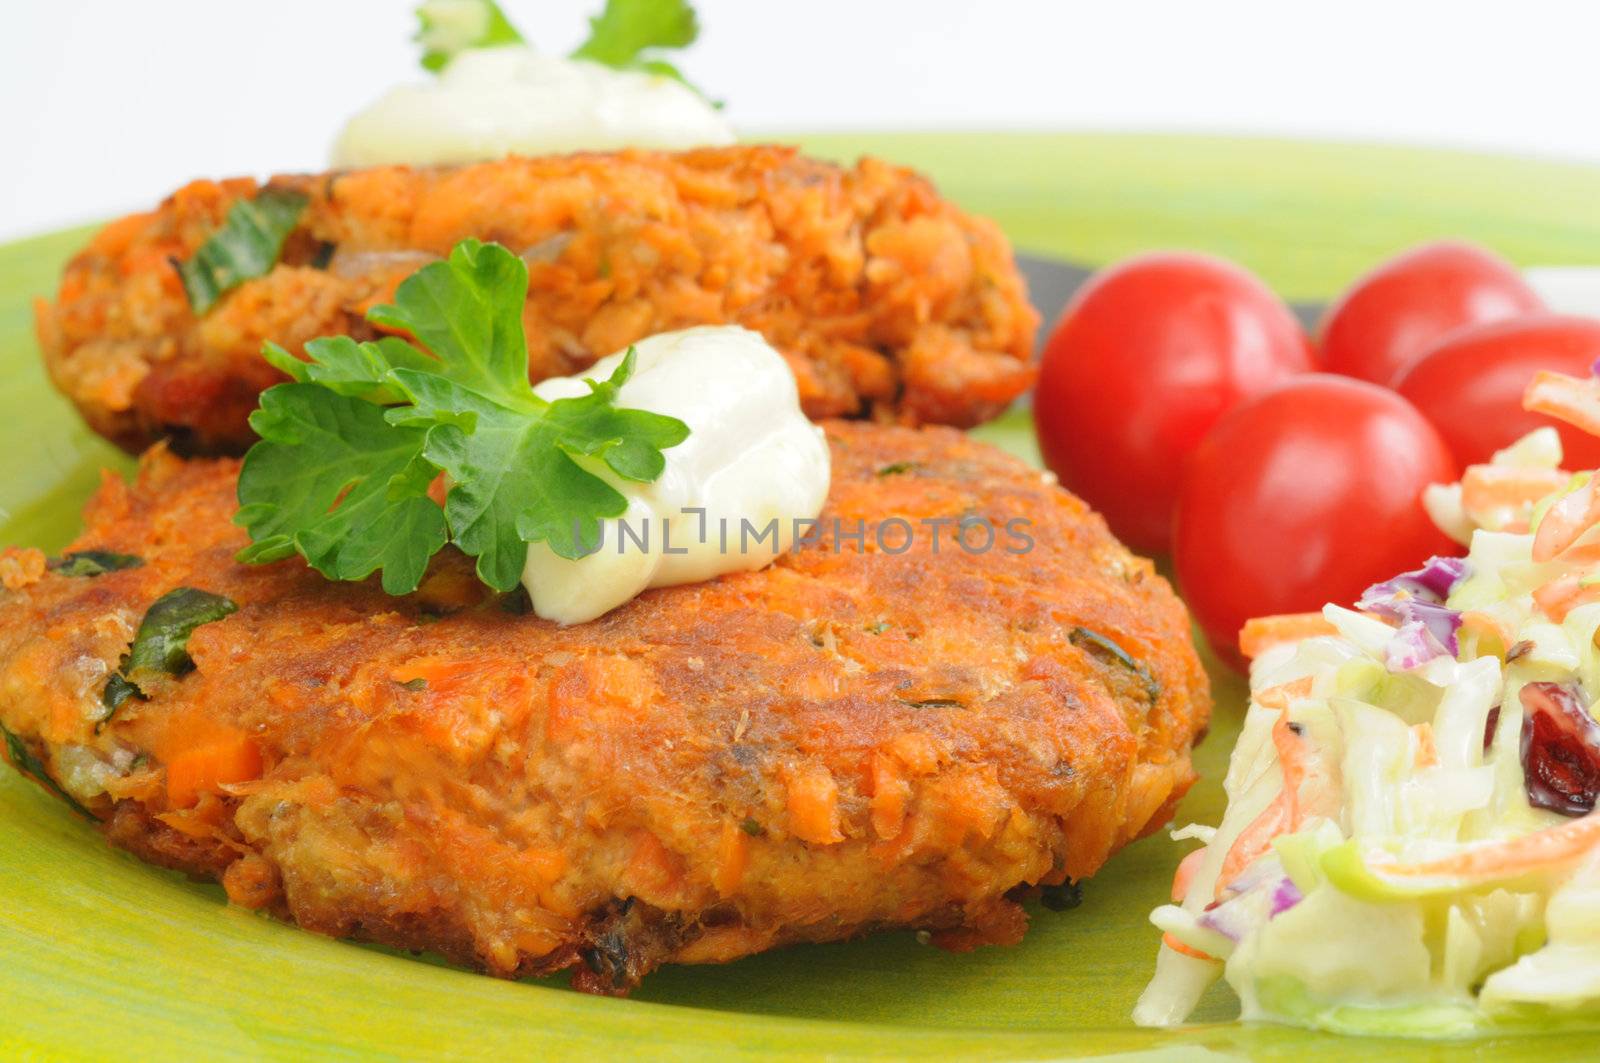 Delicious homemade salmon burgers served with vegetables.